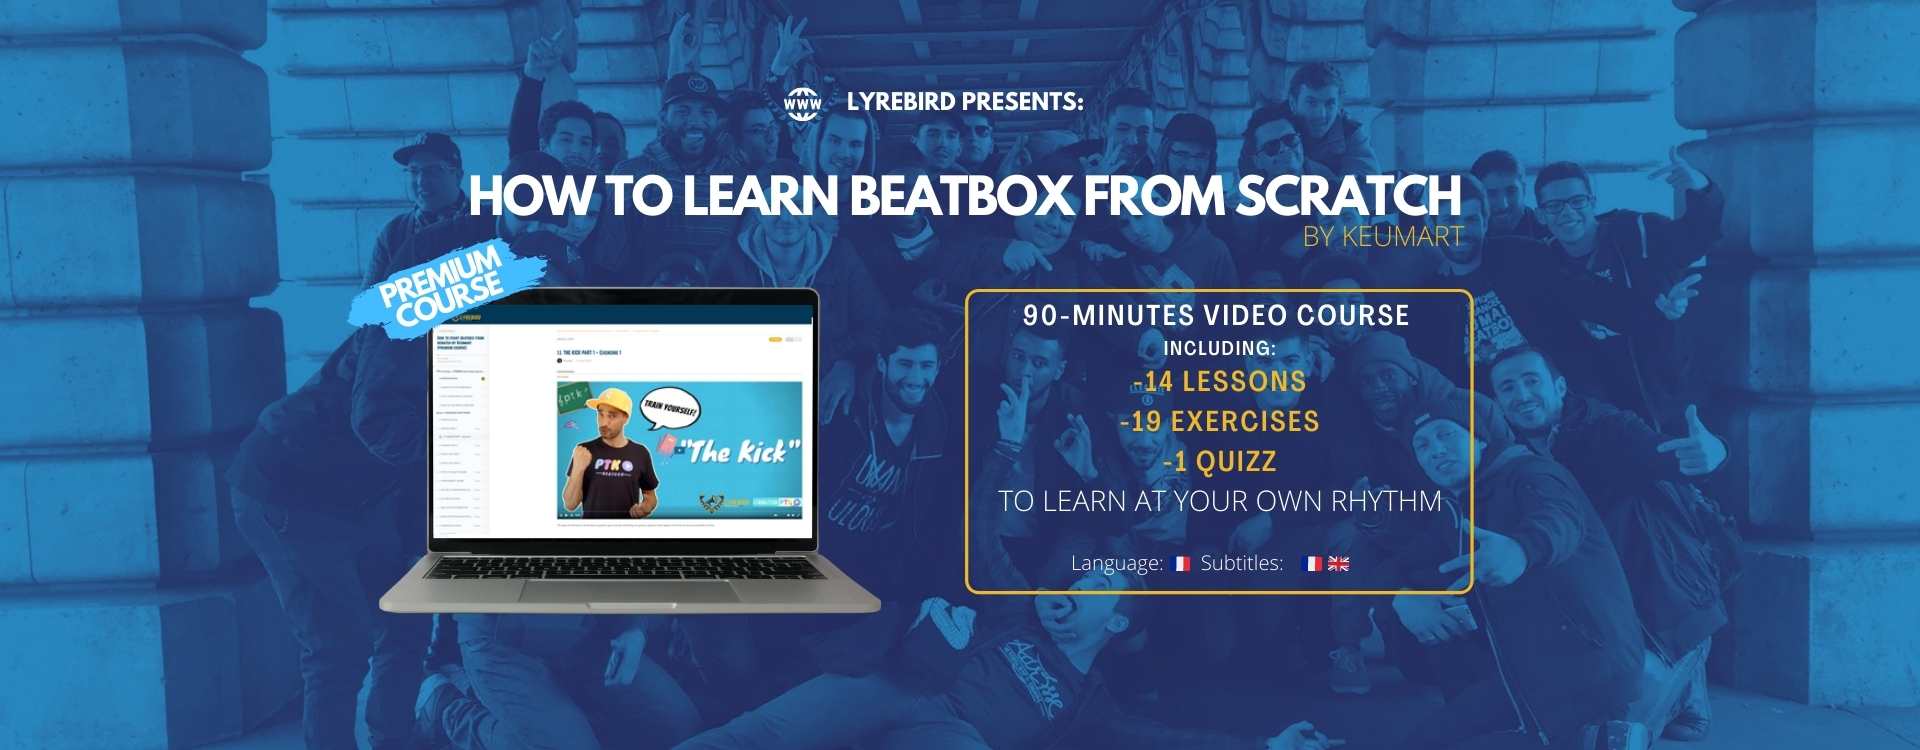 PTK Serie 1 - How to learn Beatbox from Scratch by Keumart - Blog version